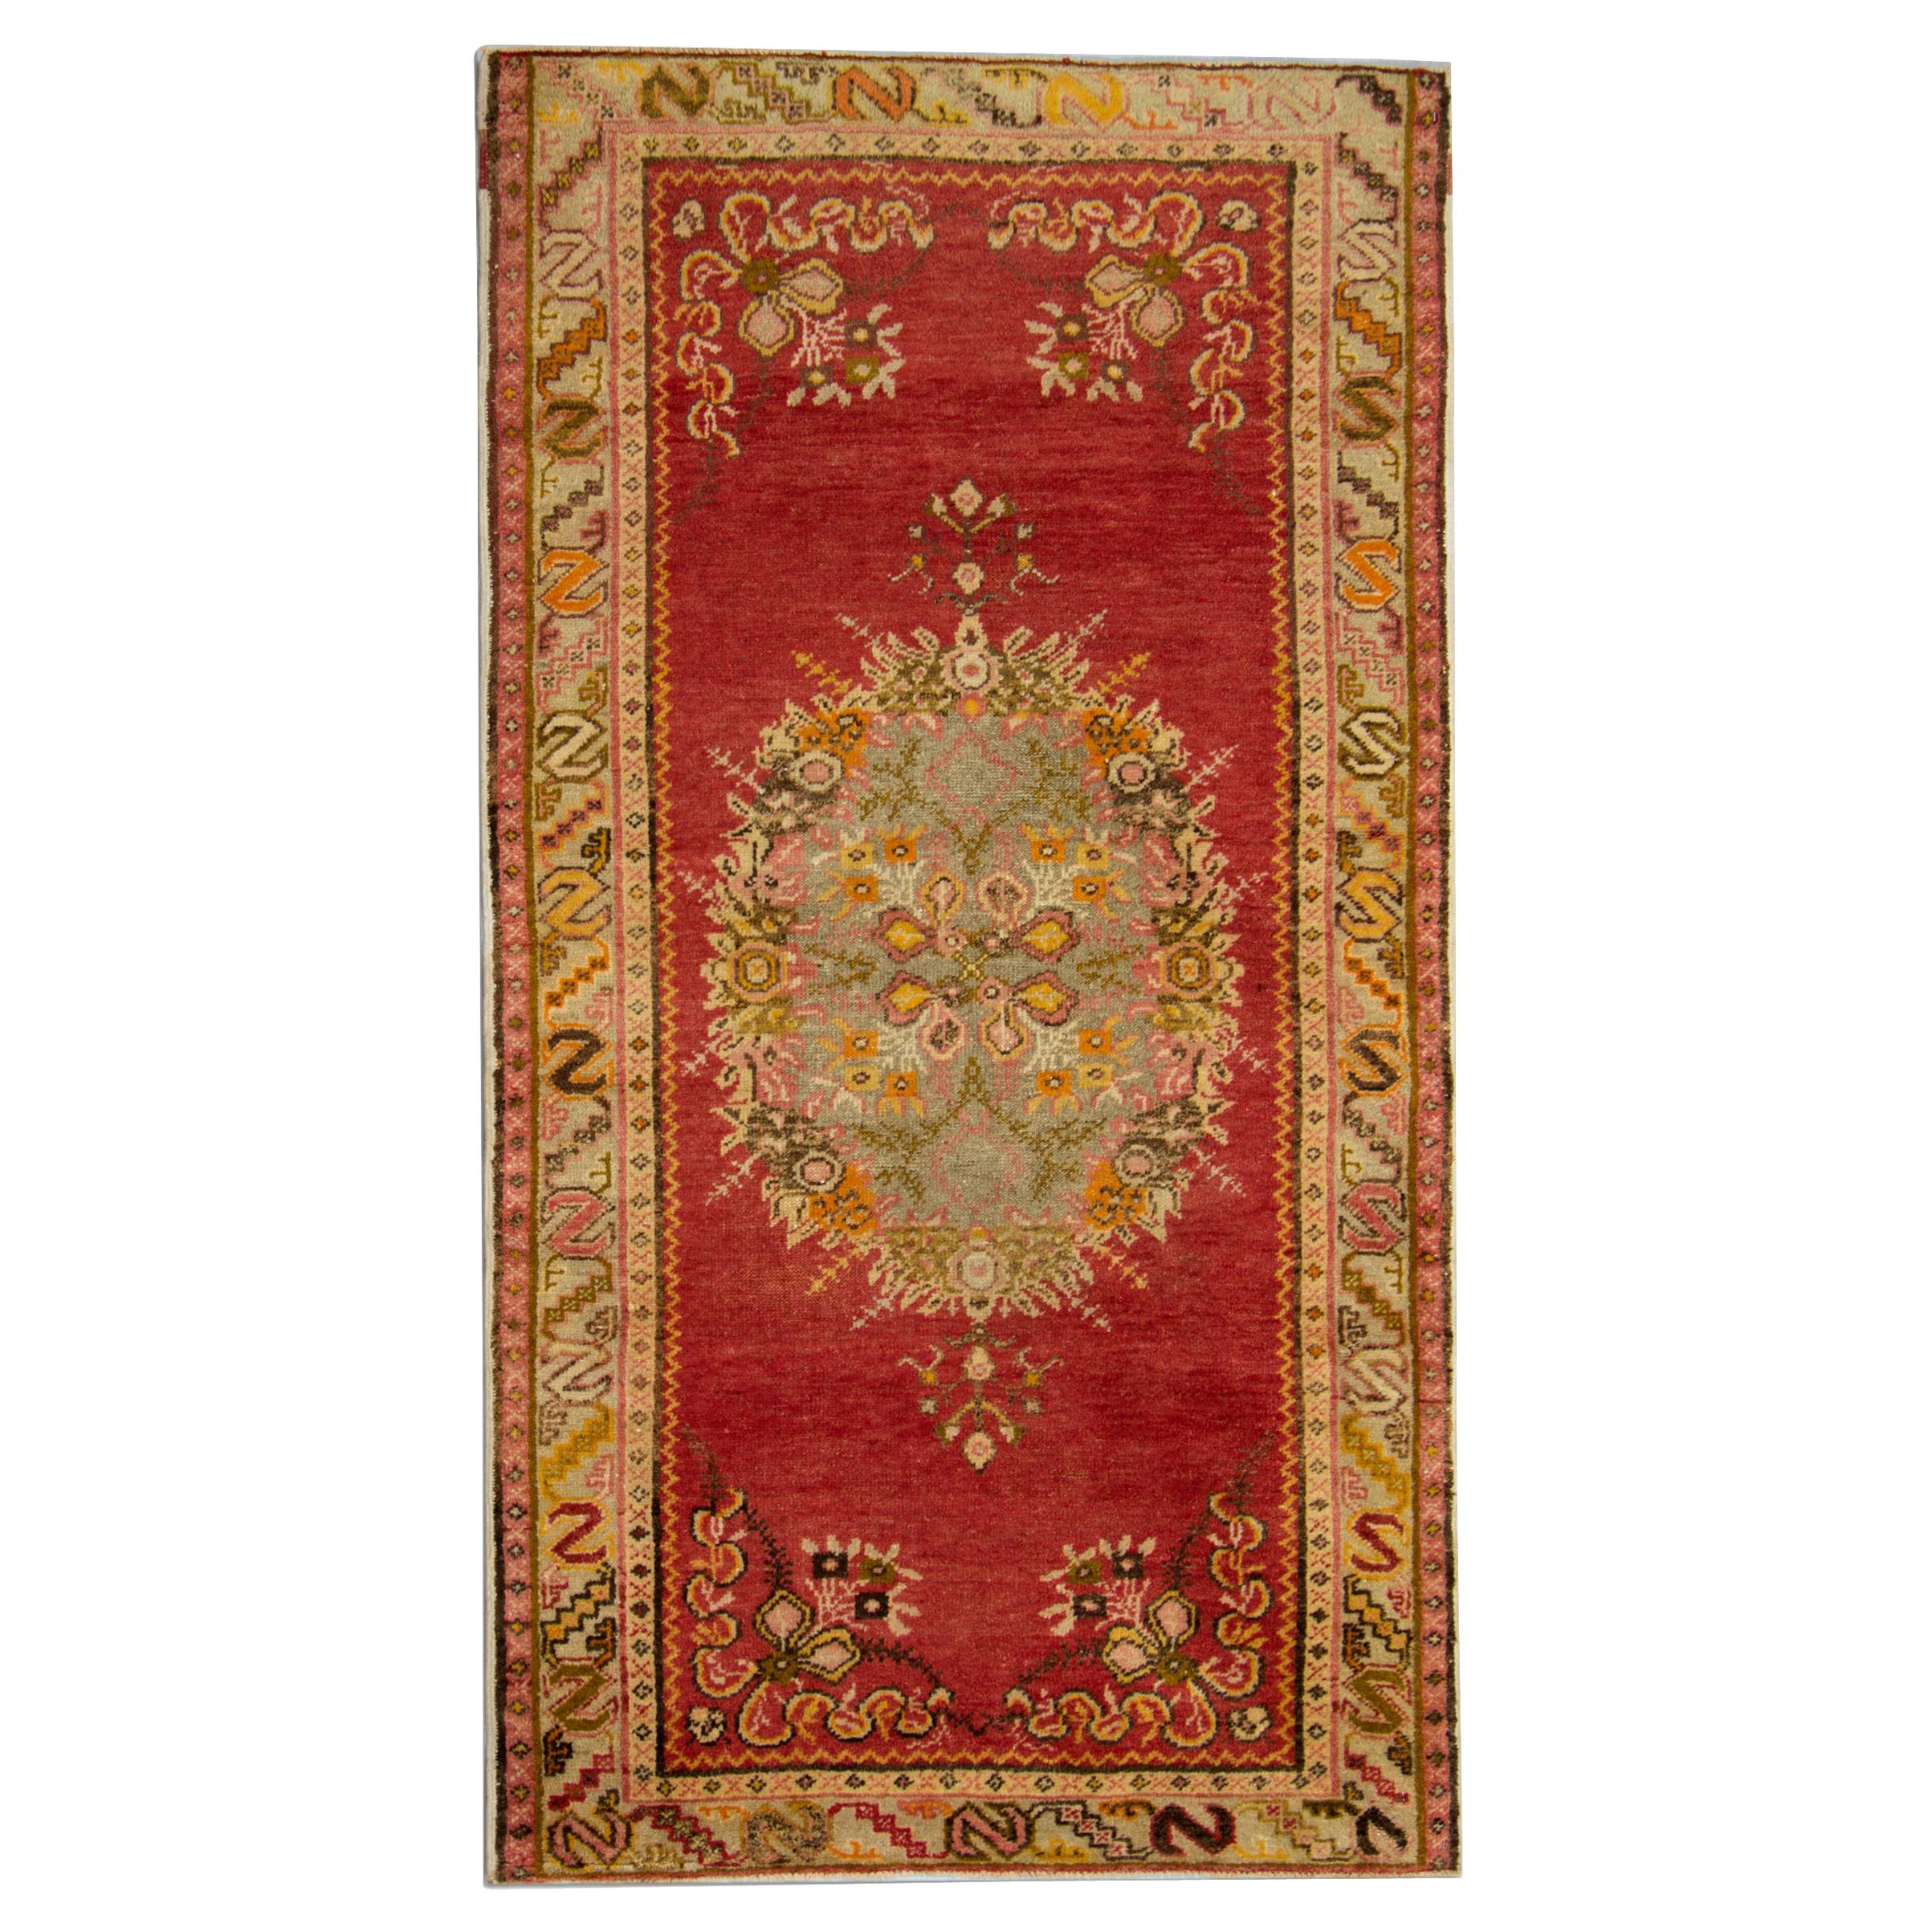 Handmade Carpet Antique Rugs, Turkish Rug, luxury Red Oriental Rugs for Sale For Sale